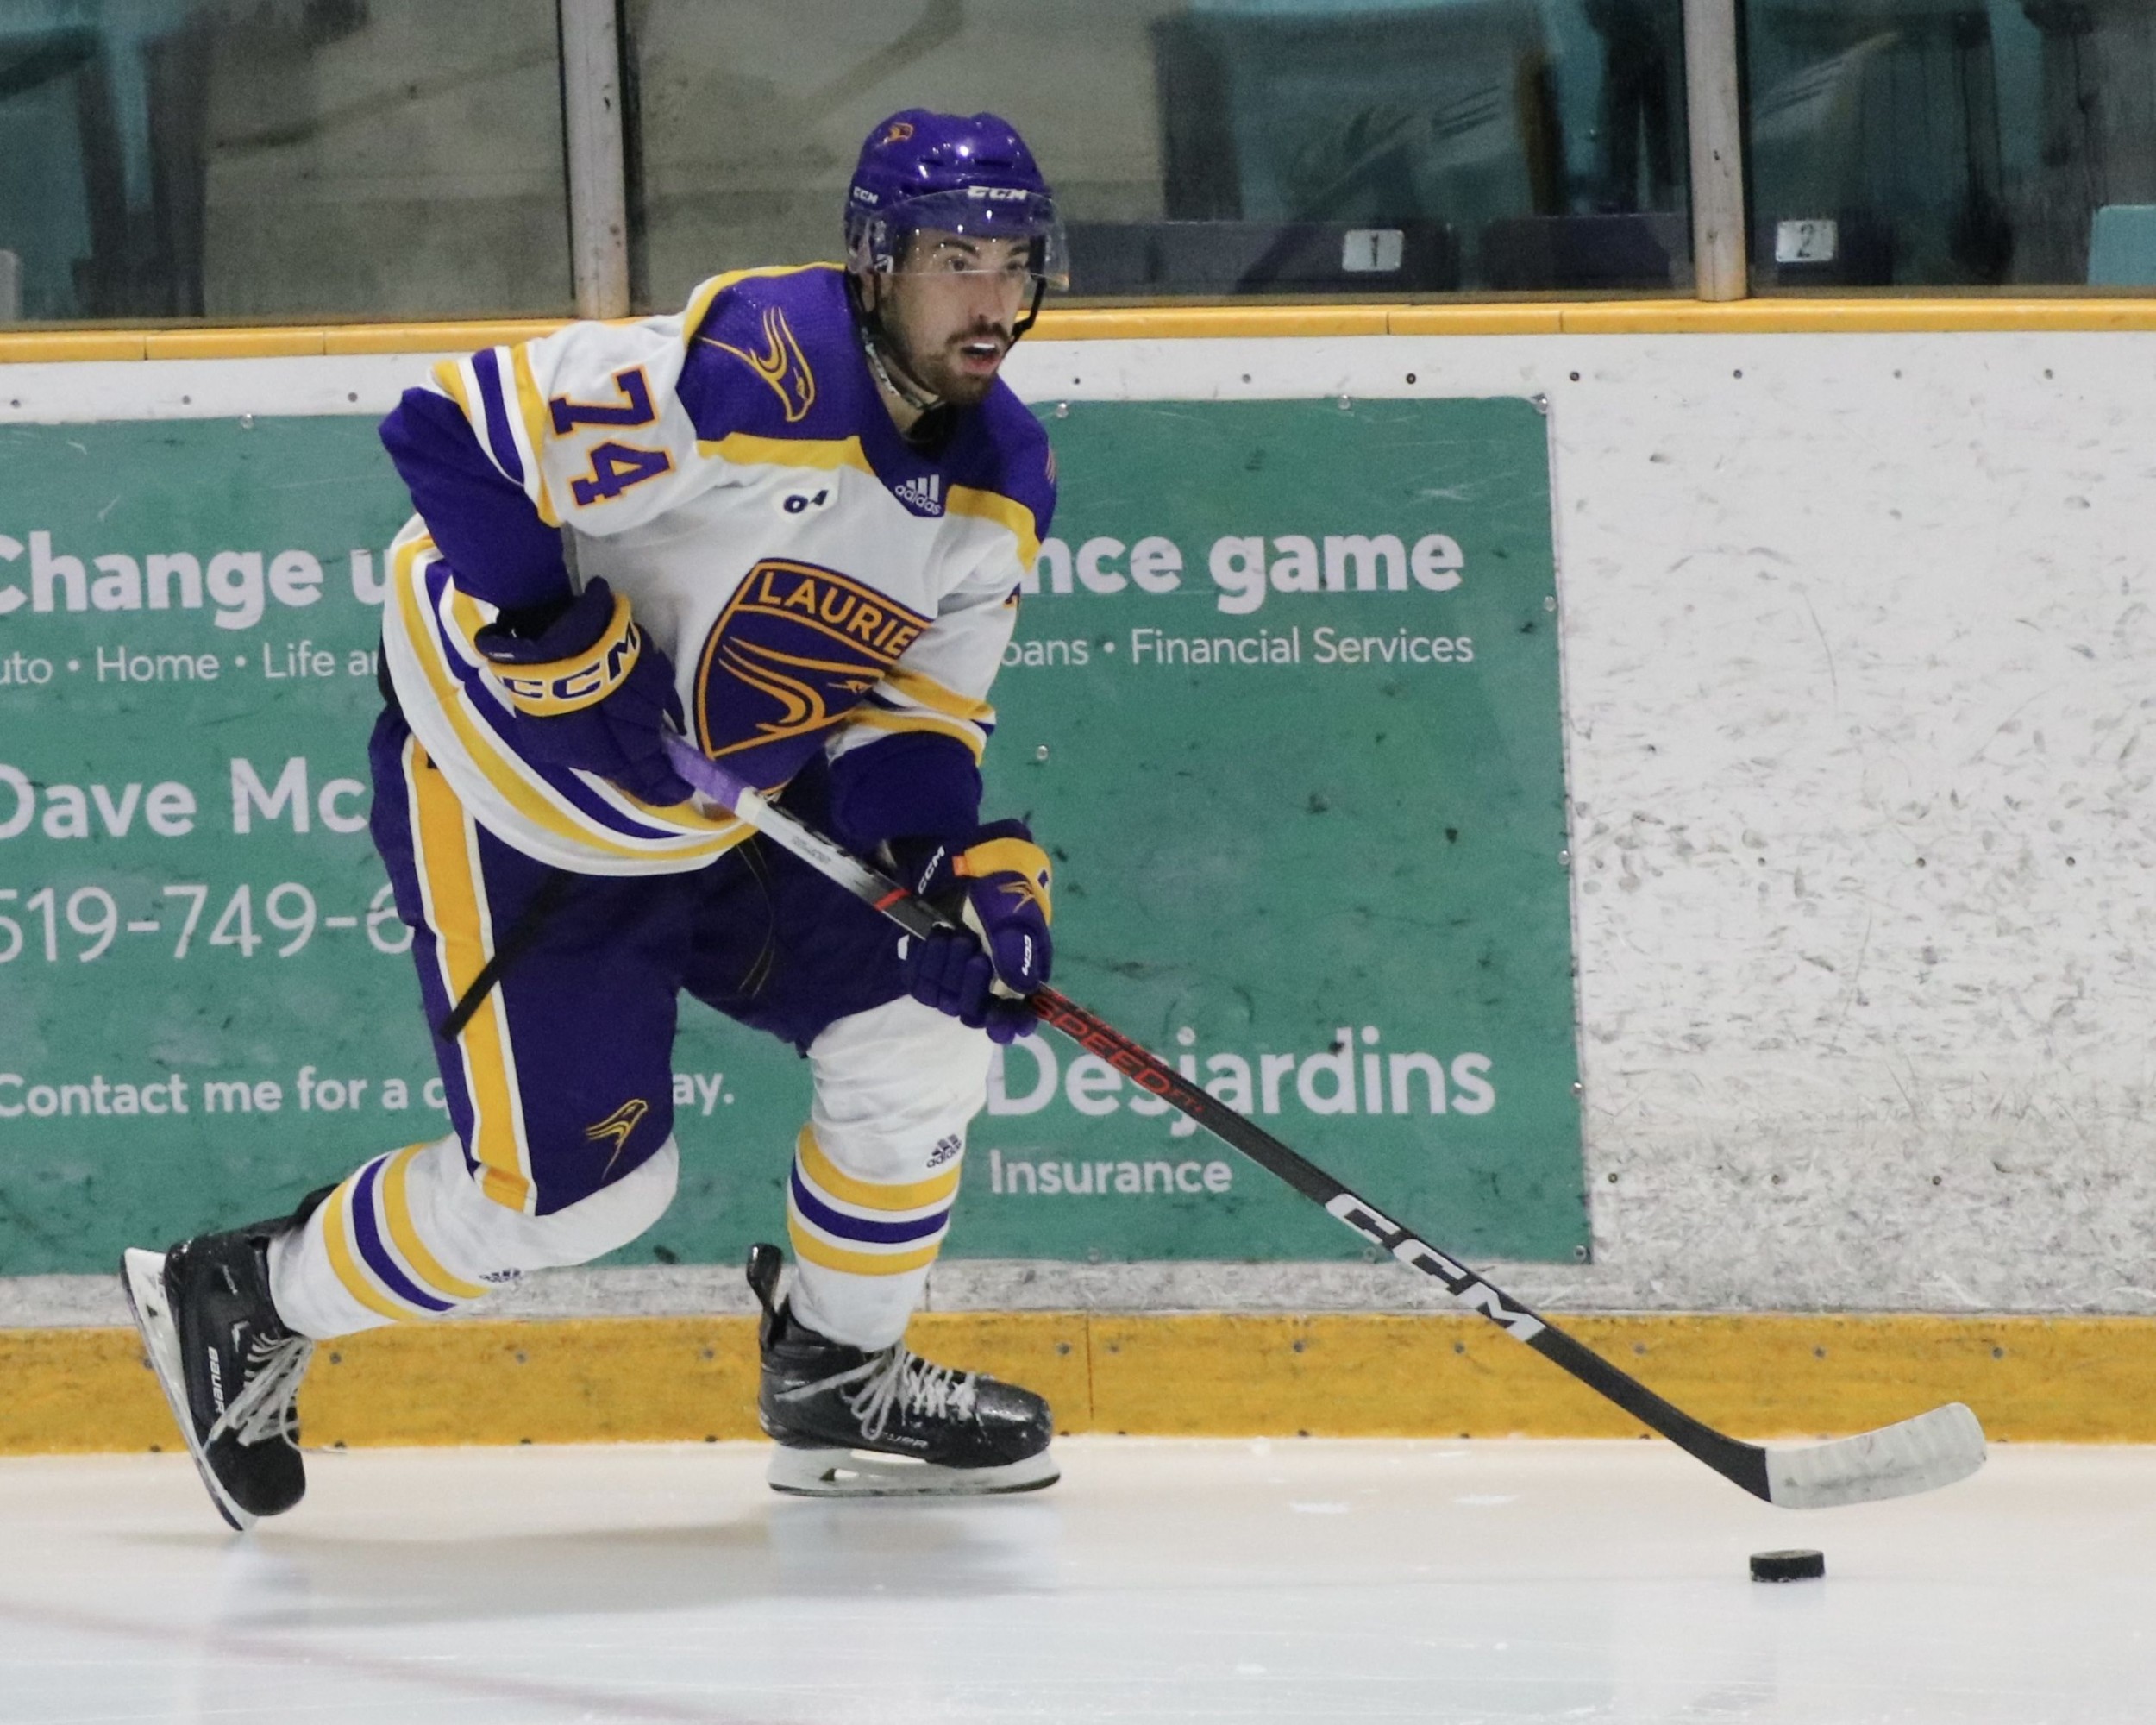 Laurier men's hockey player on ice